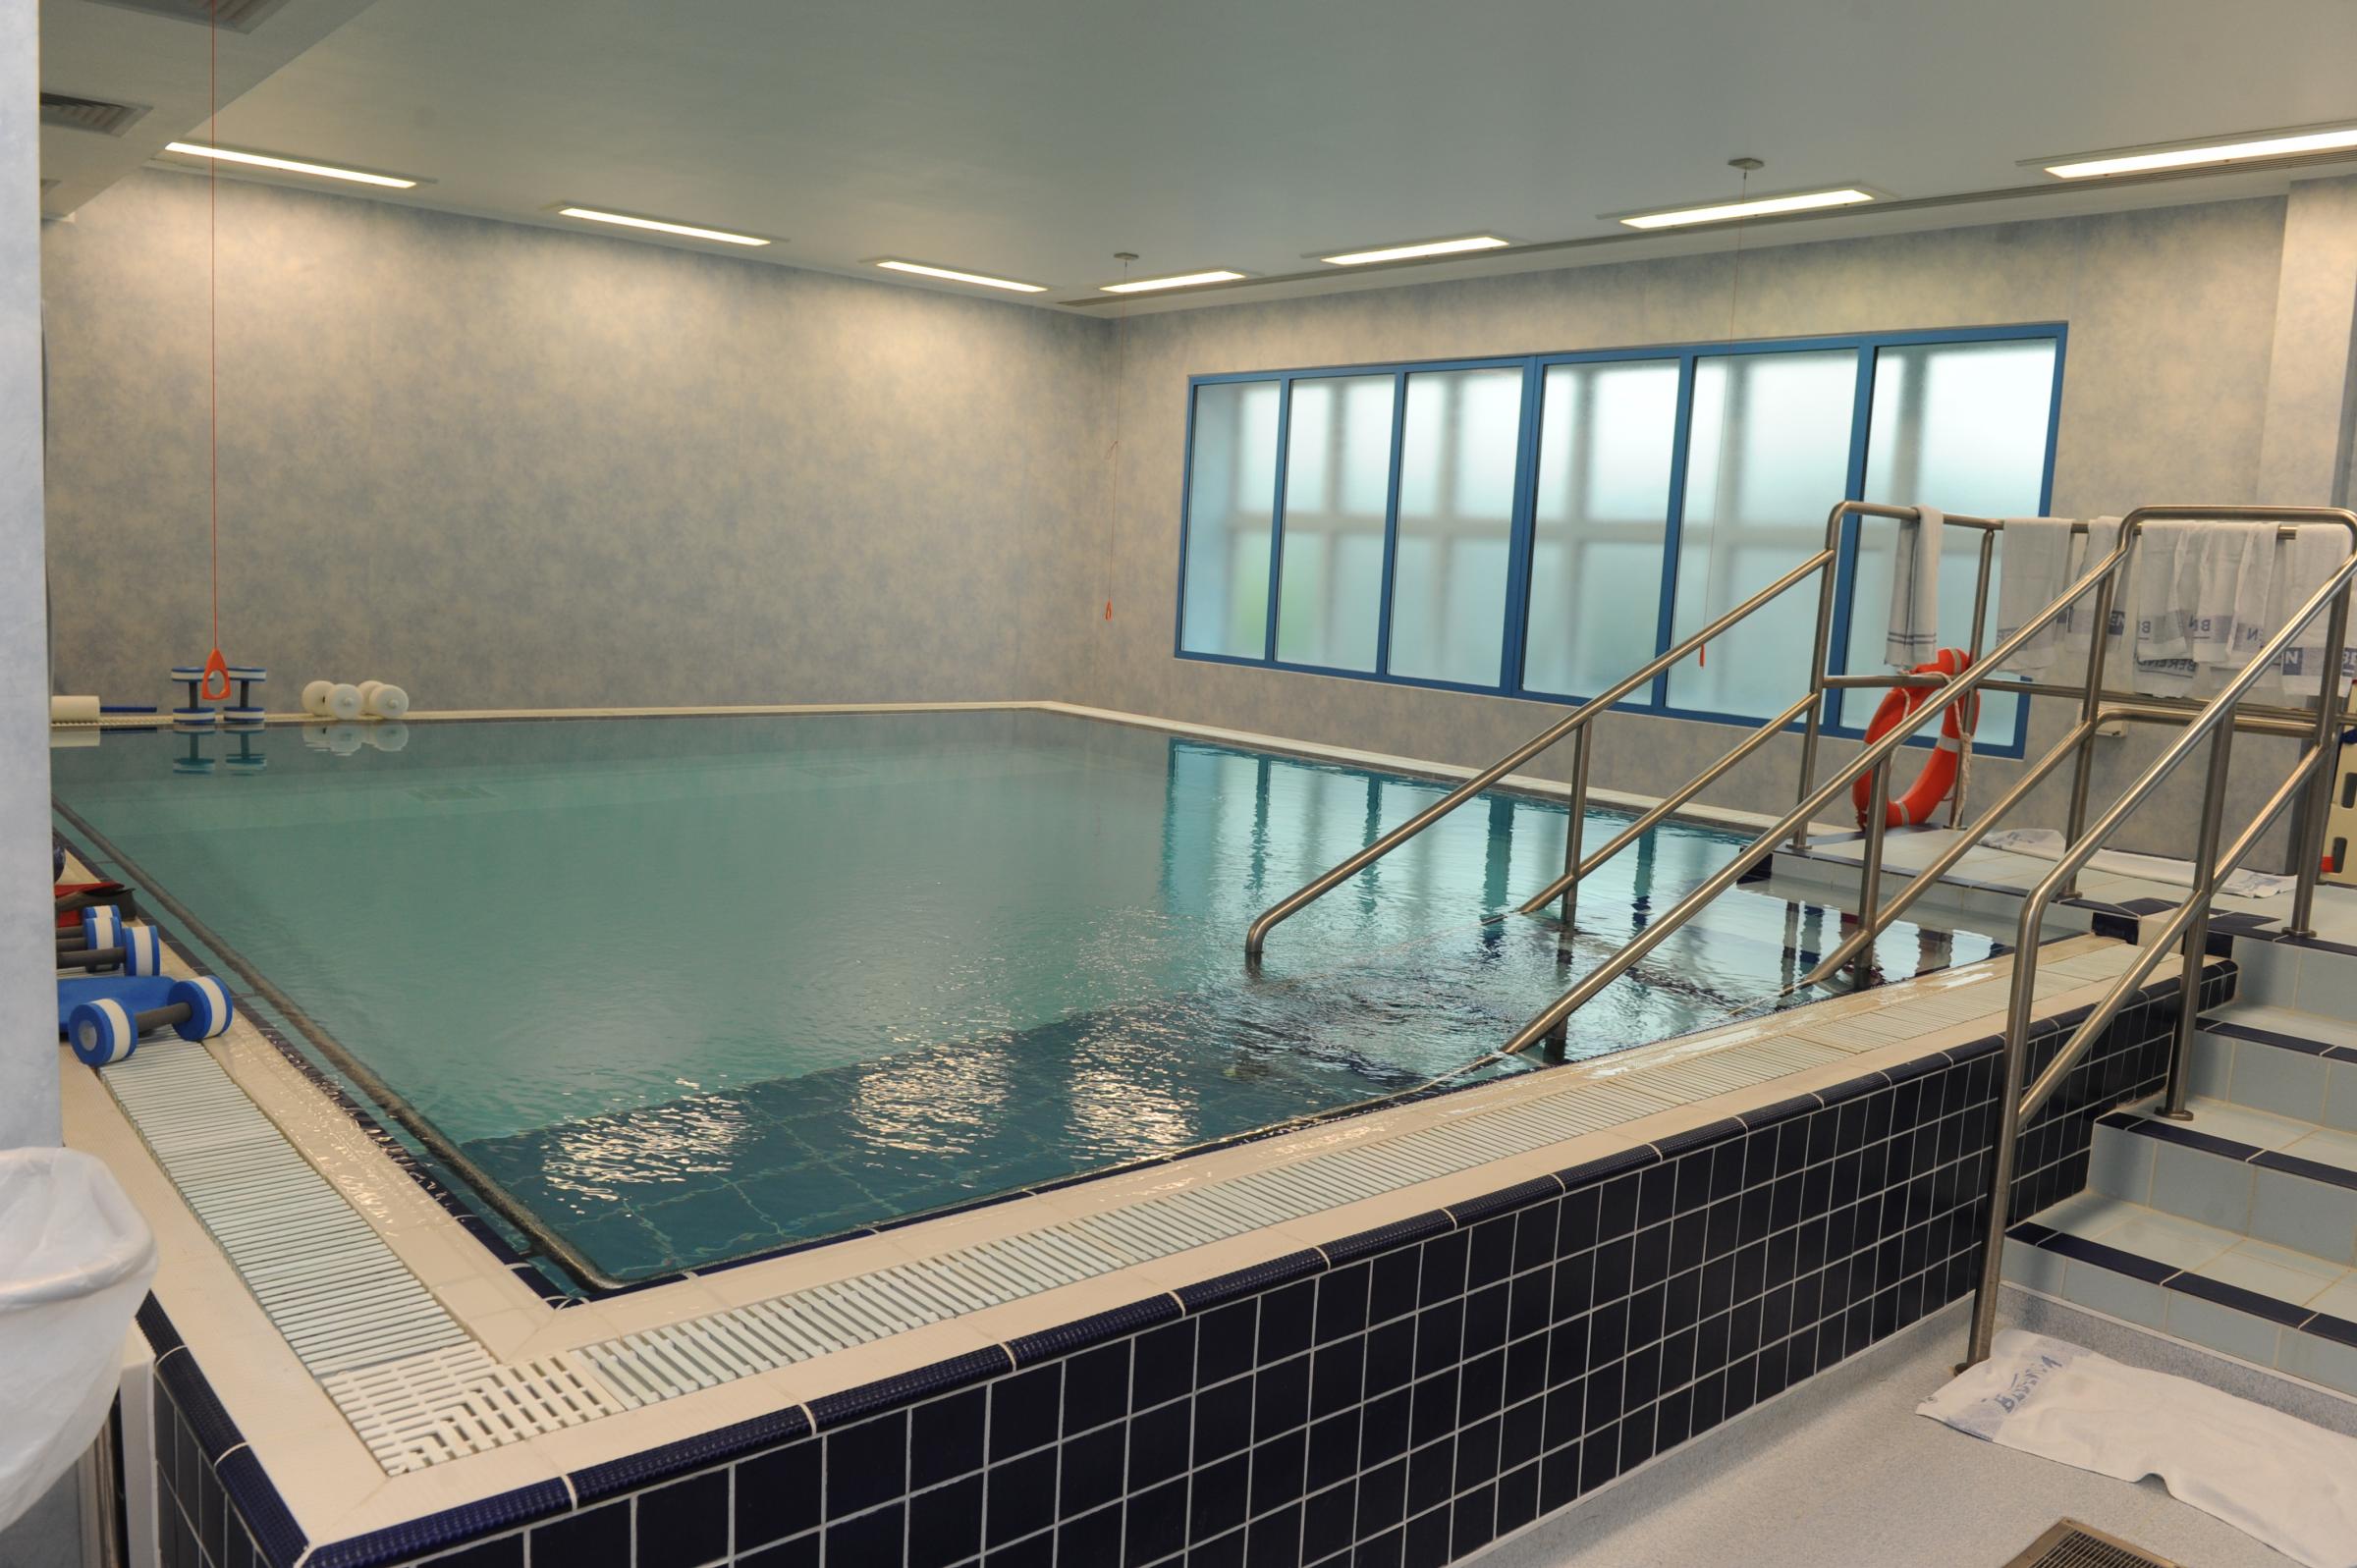 The hydrotherapy pool at Russells Hall Hospital, Dudley, which is one of just a few in the region. Pic - Dudley Group